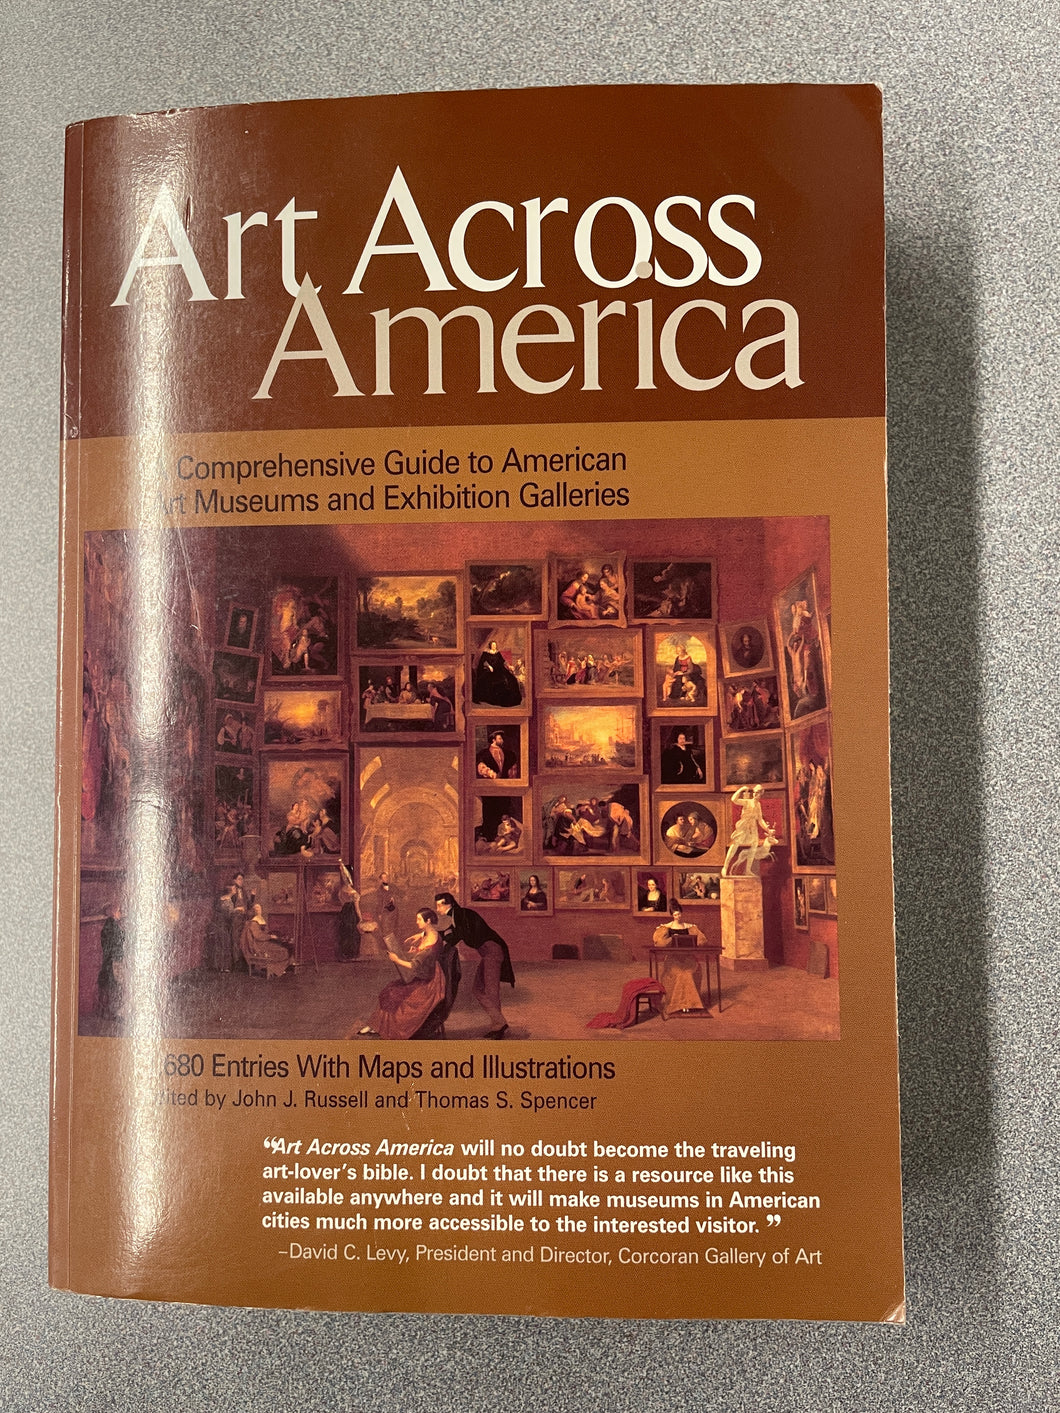 Art Across America: A Comprehensive Guide to American Art Museums and Exhibition Galleries, Russell, John J., ed. [2000] A 5/24